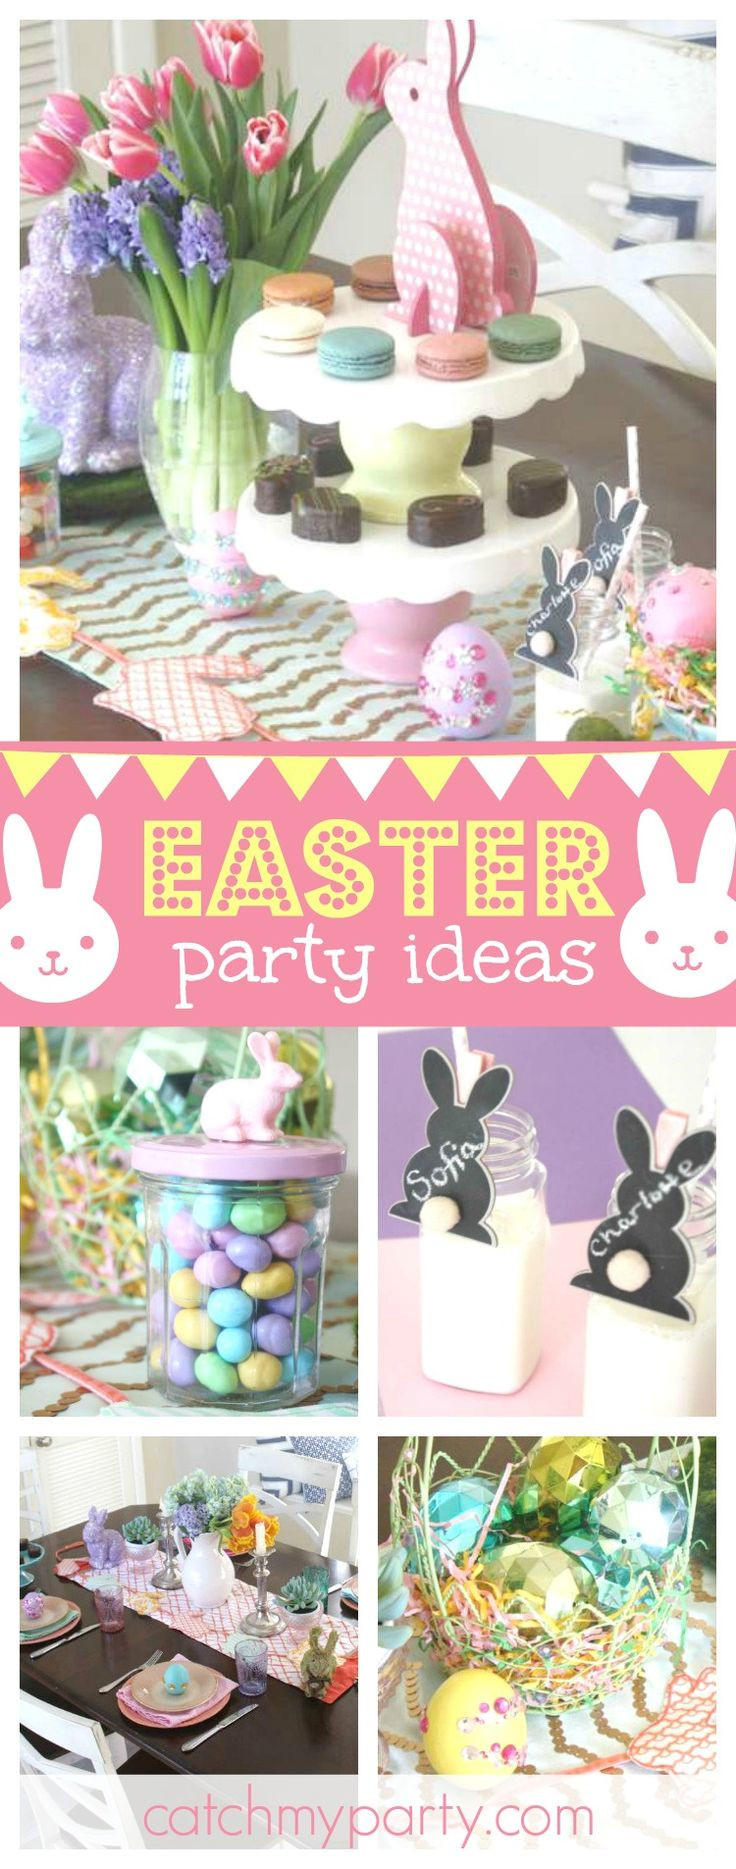 Easter Party Ideas On Pinterest
 763 best images about Easter Party Ideas on Pinterest